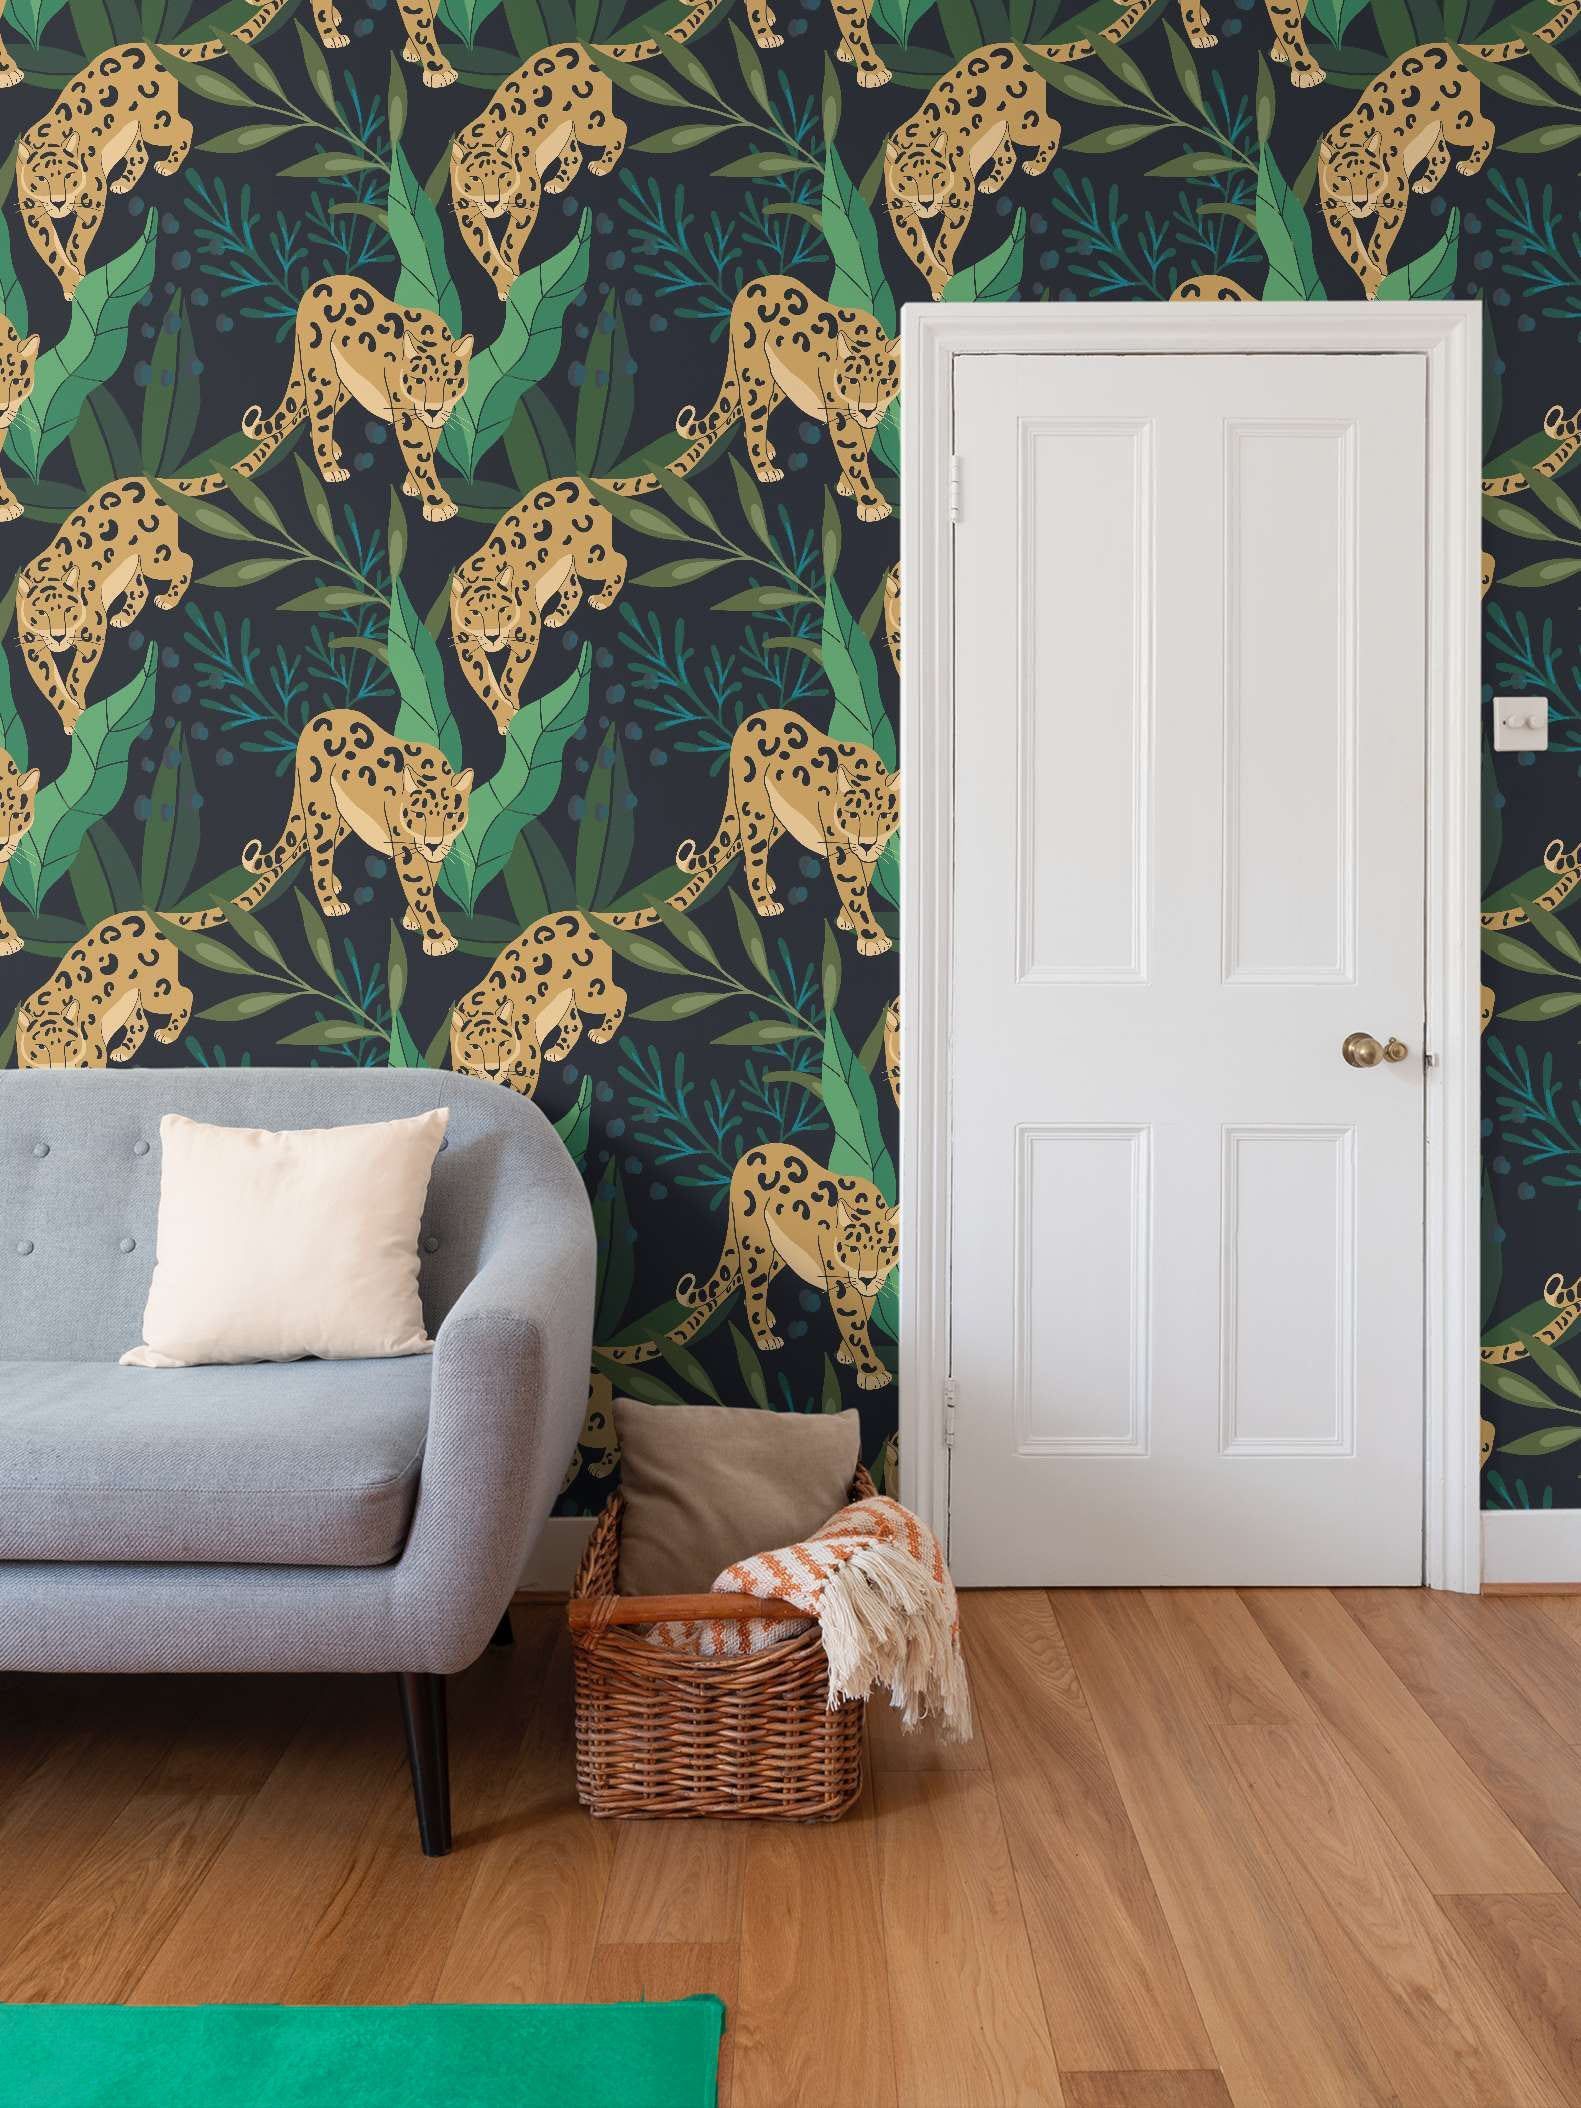 Jaguar wallpaper in a living room. This wallpaper was created by Heartspace Designs to represent a deep and edgy theme as well as represent Jacksonville and the home team Jaguars.